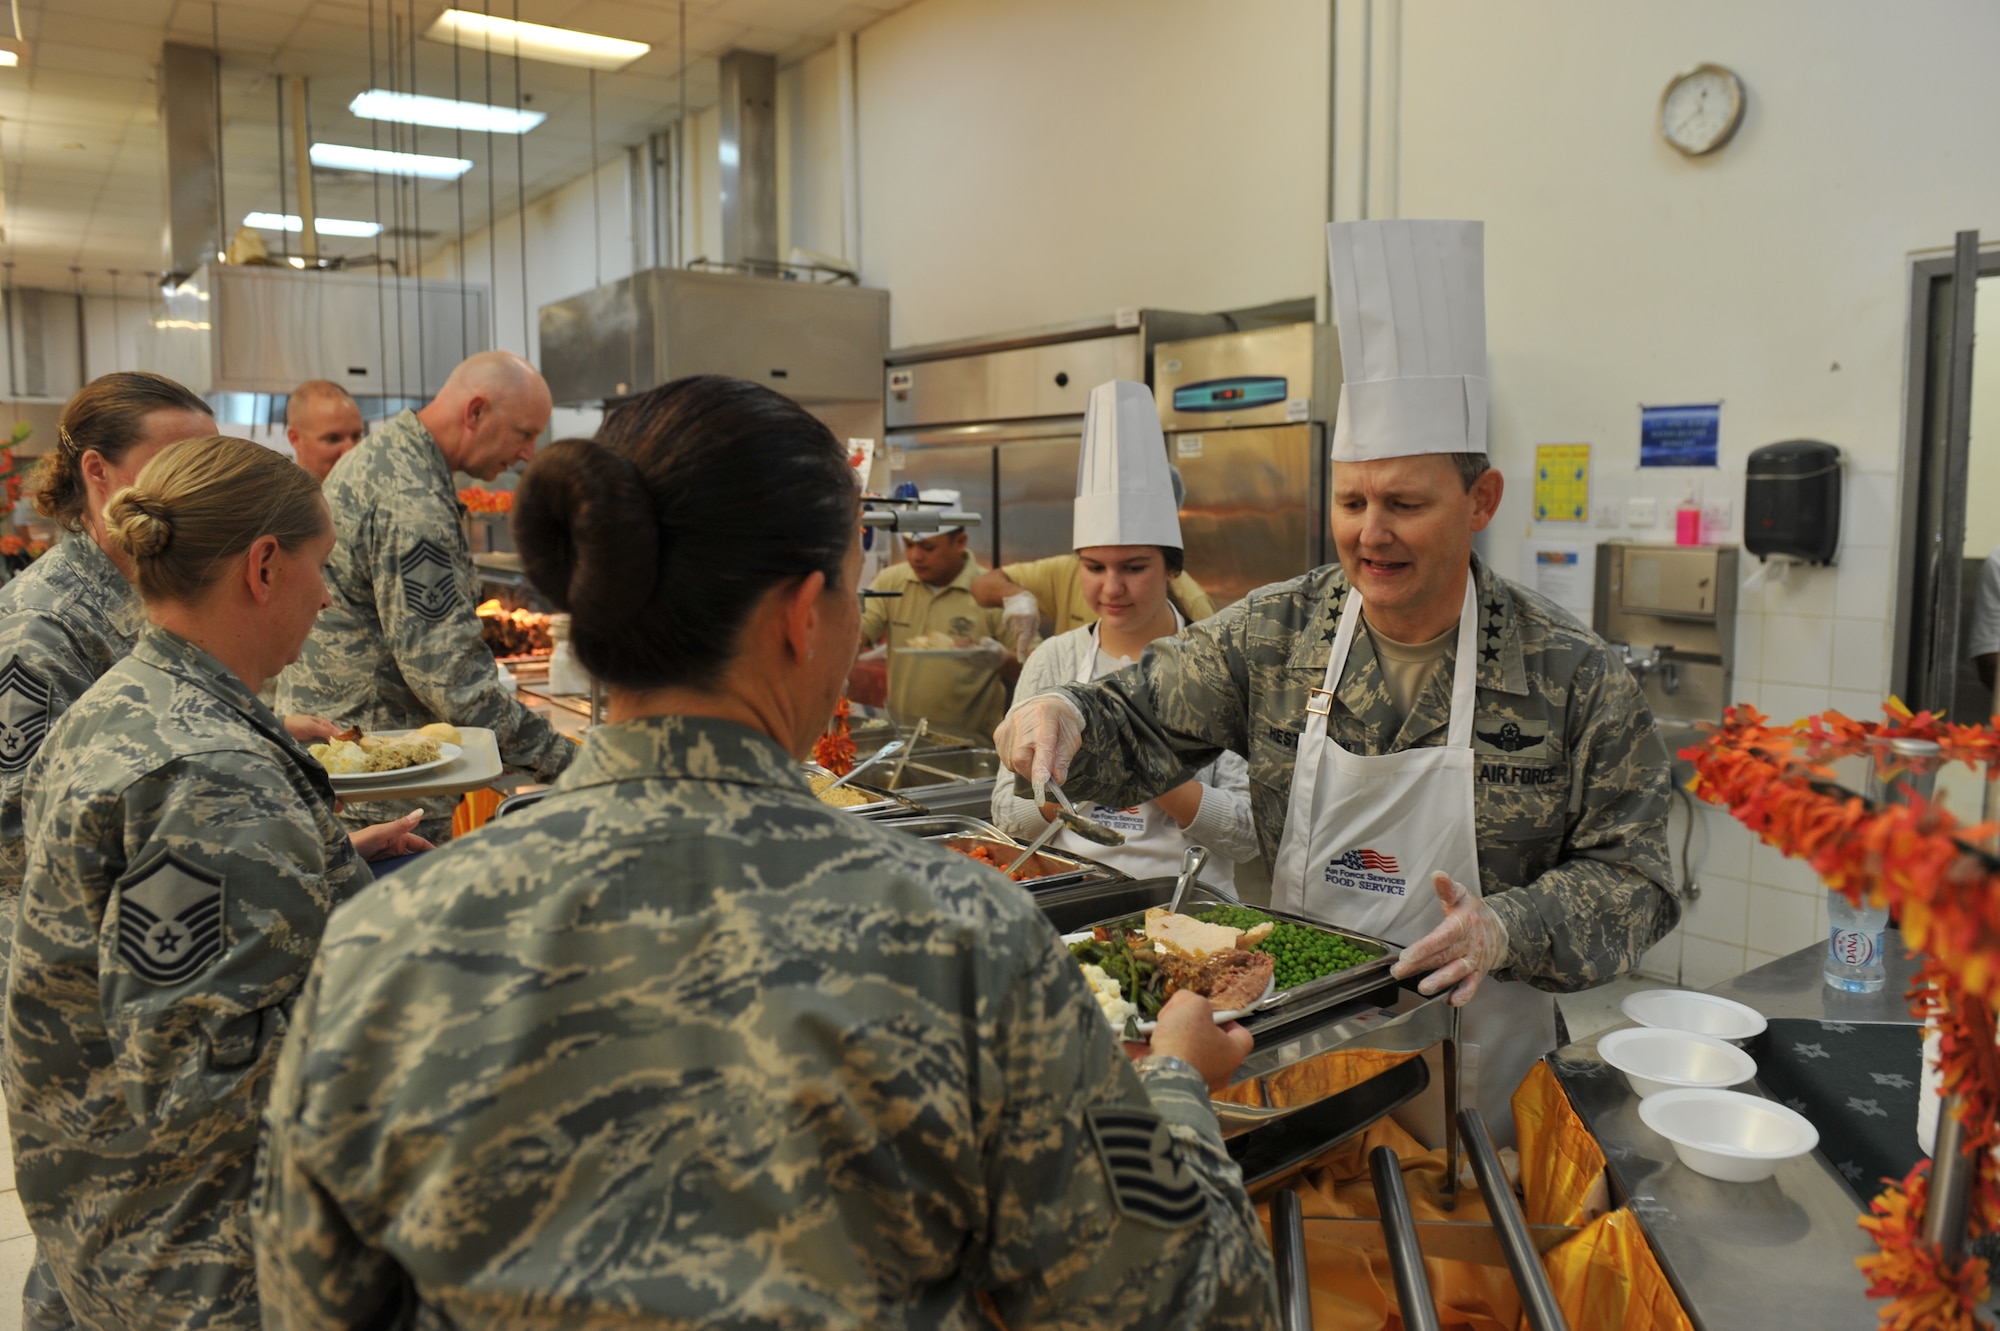 Lt. Gen. John Hesterman III, U.S. Air Forces Central Command commander serves Thanksgiving day meals to service members assigned to the 379th Air Expeditionary Wing and tenant units in Southwest Asia, on Nov. 28, 2013. (U.S. Air Force photo/Master Sgt. David Miller)